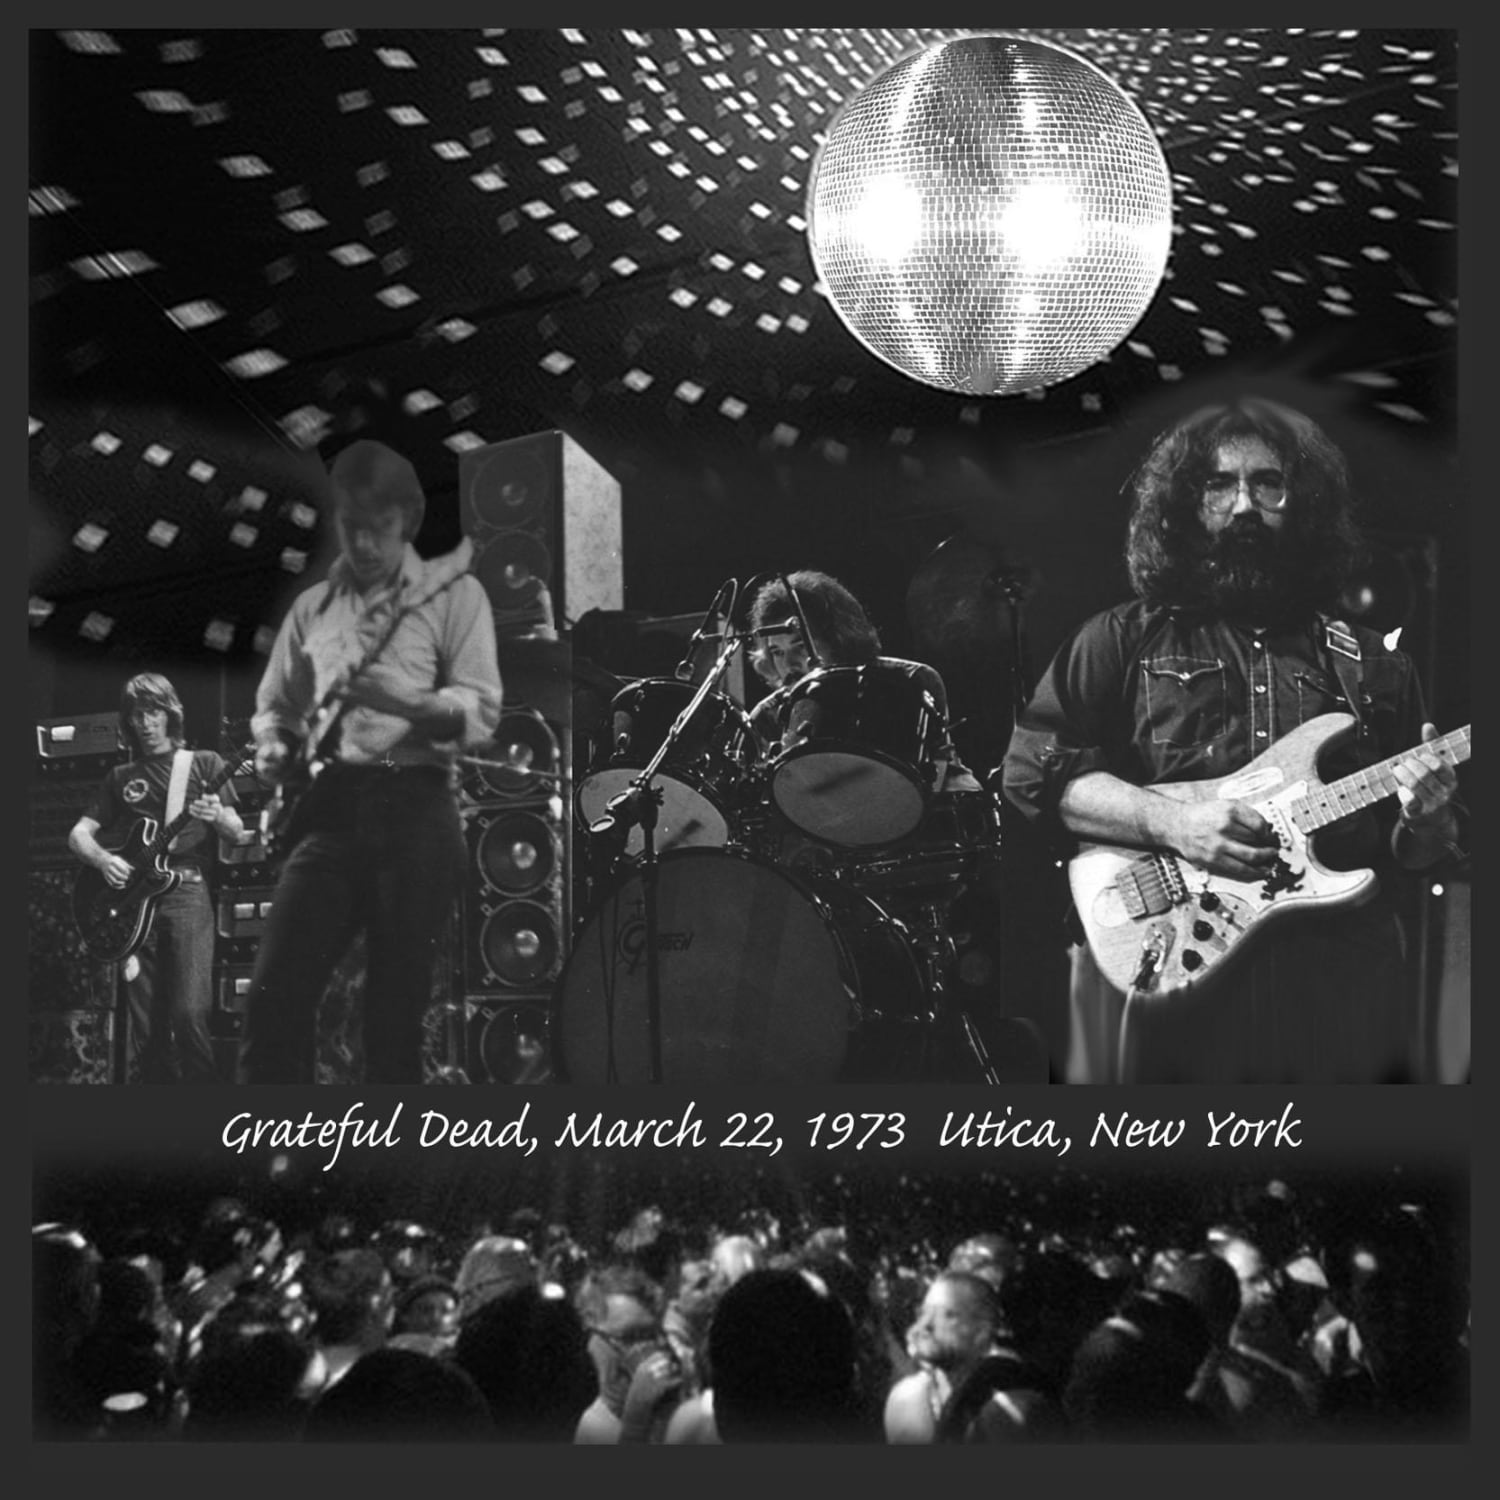 It was 49 years ago tonight that my life changed, 3-22-73 in Utica NY, my first Grateful Dead concert. There is nothing like a Grateful Dead concert. The second set was mostly a state of ecstasy, highlighted by an otherworldly The Other One, wrapped up with a dynamite Sugar Magnolia. Take me back...